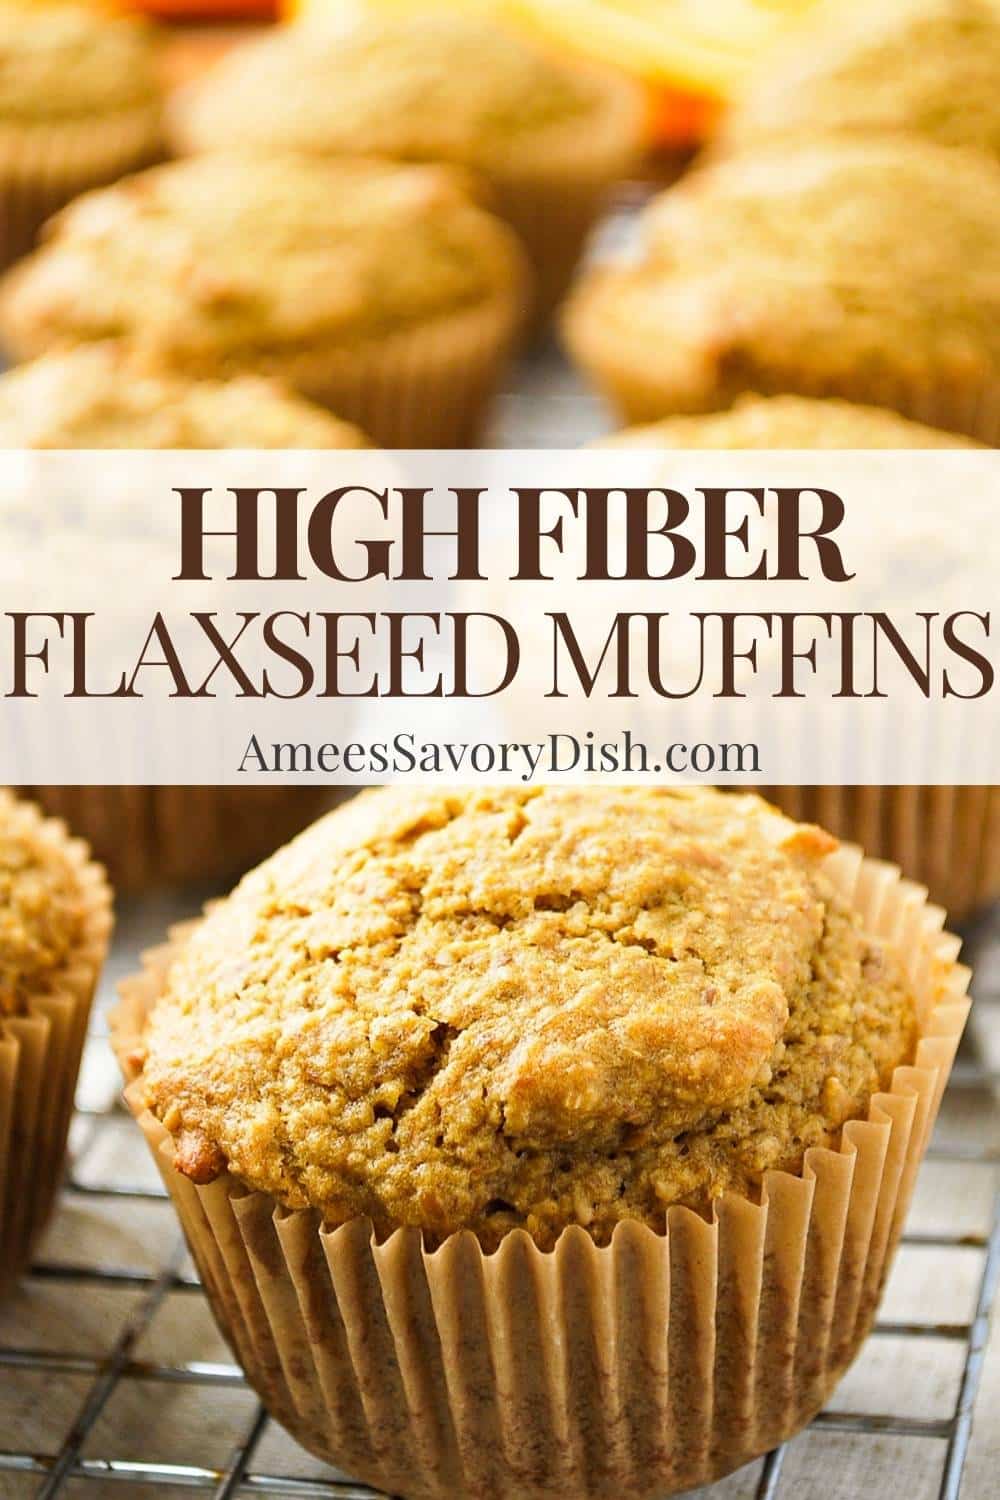 This delicious fiber-packed recipe for flaxseed muffins is naturally sweetened, easy to make, and bakes in under 20 minutes! via @Ameessavorydish